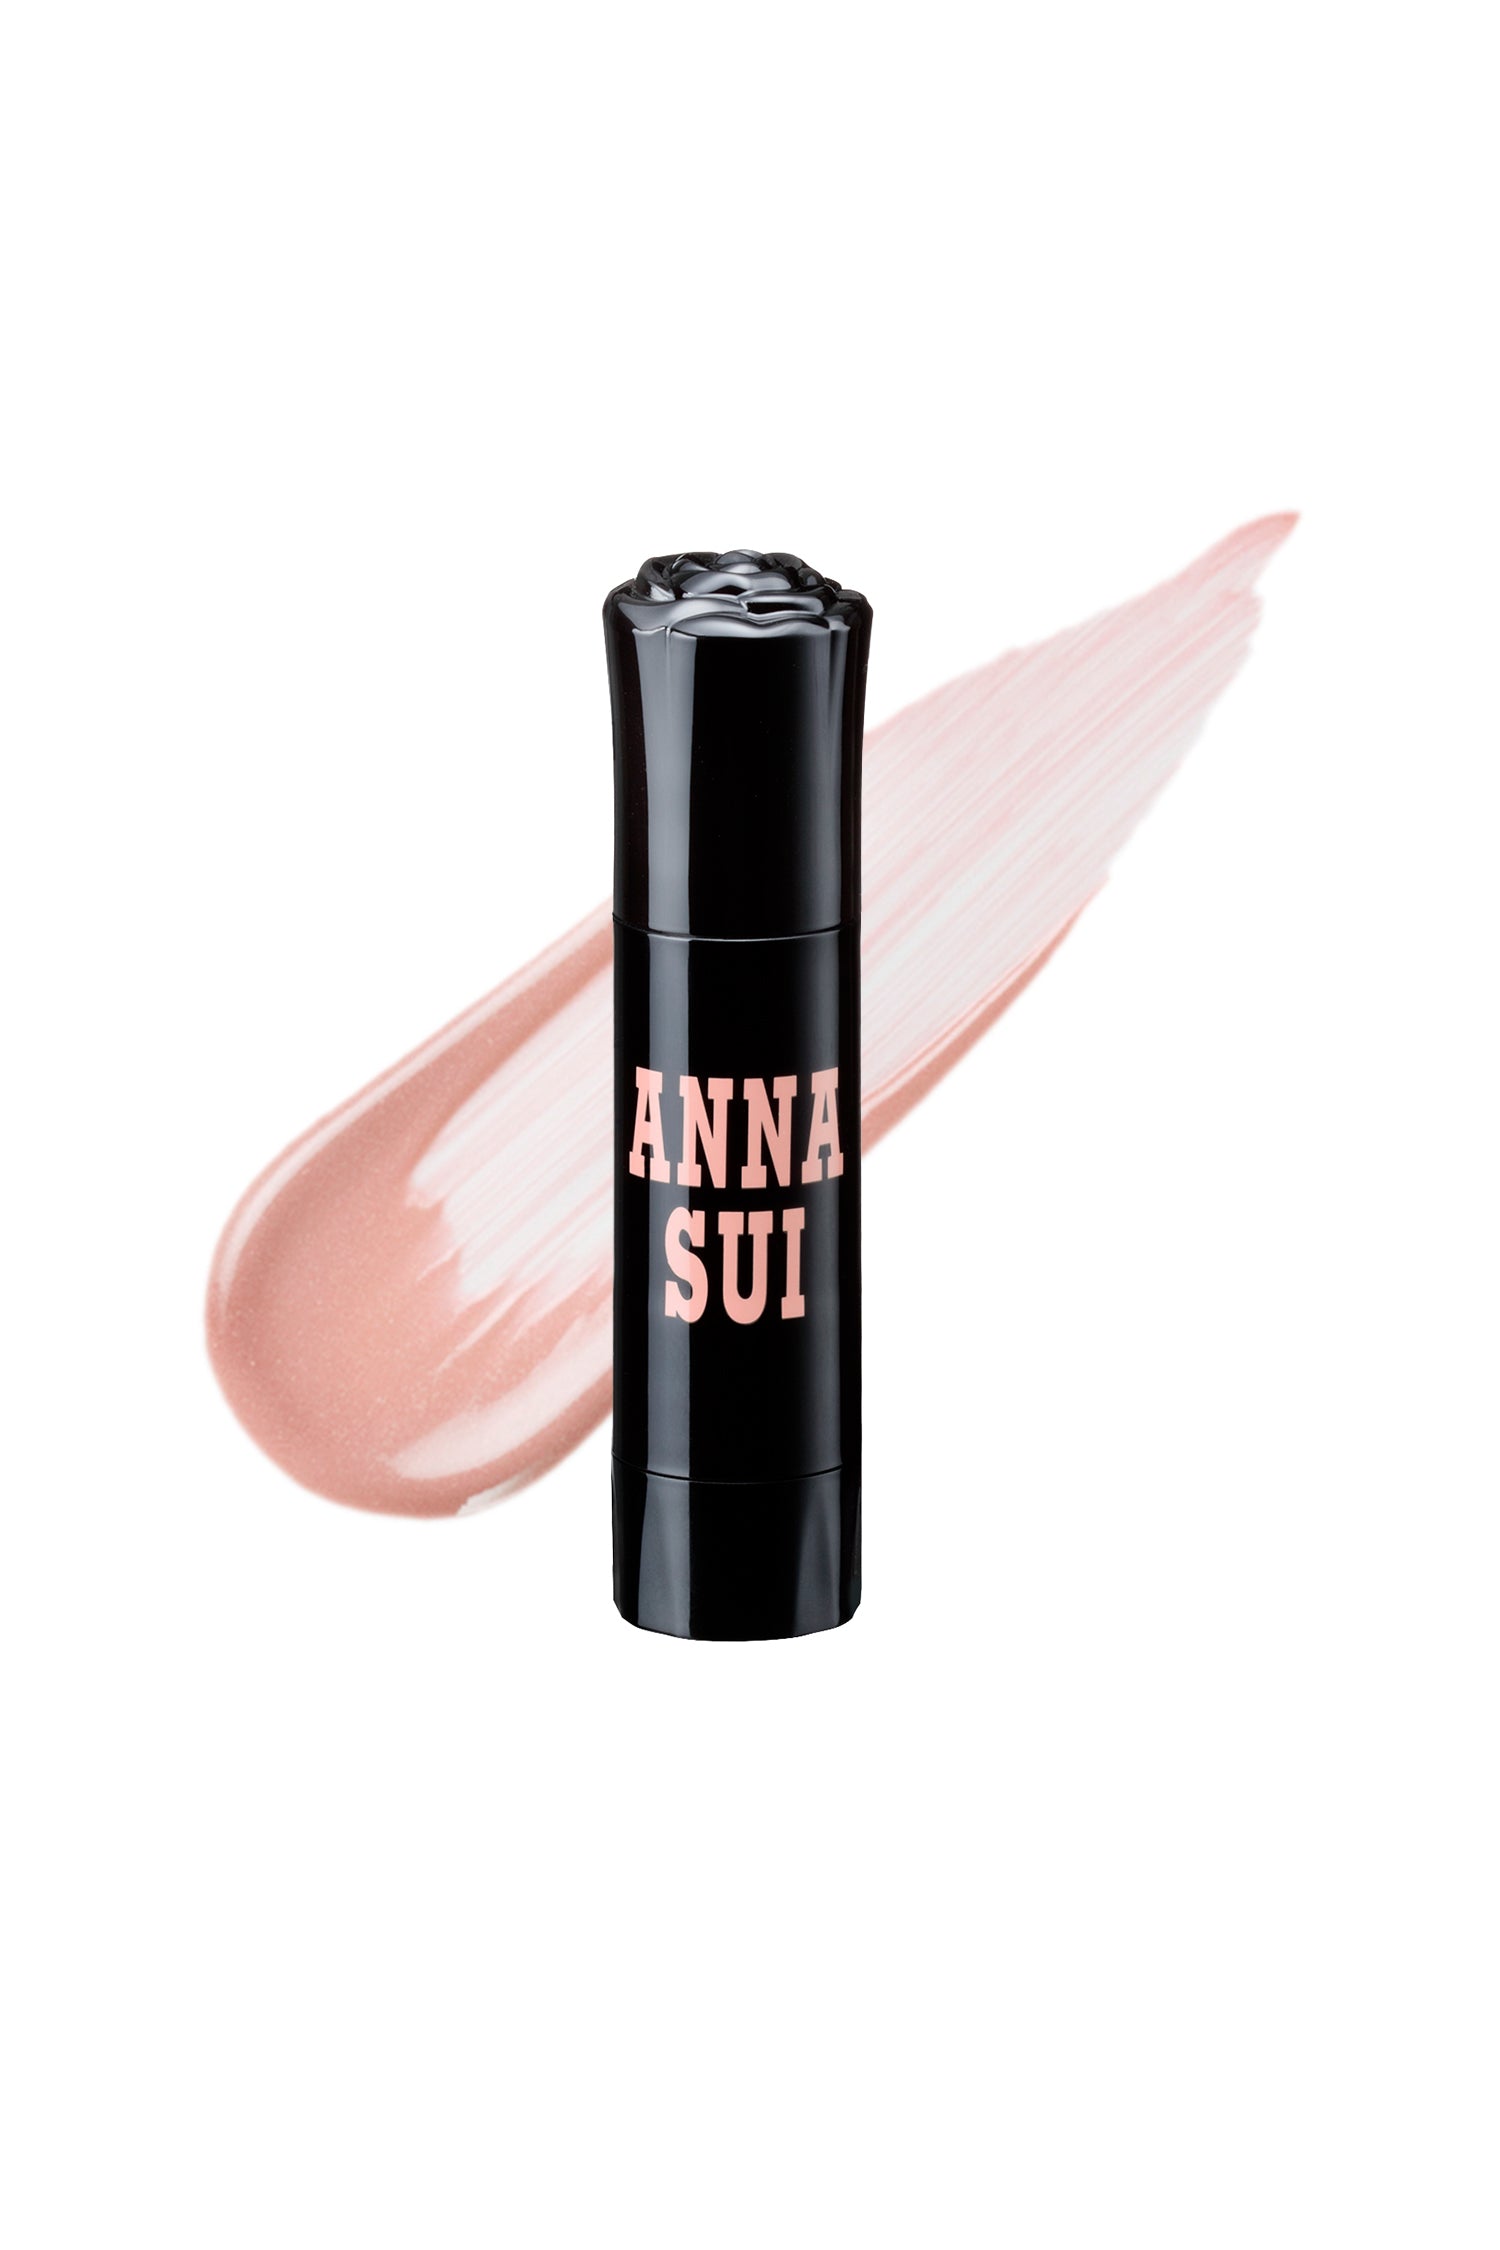 SHIMMER LIGHT - Anna Sui color match the product on cylinder case with a rose on top 